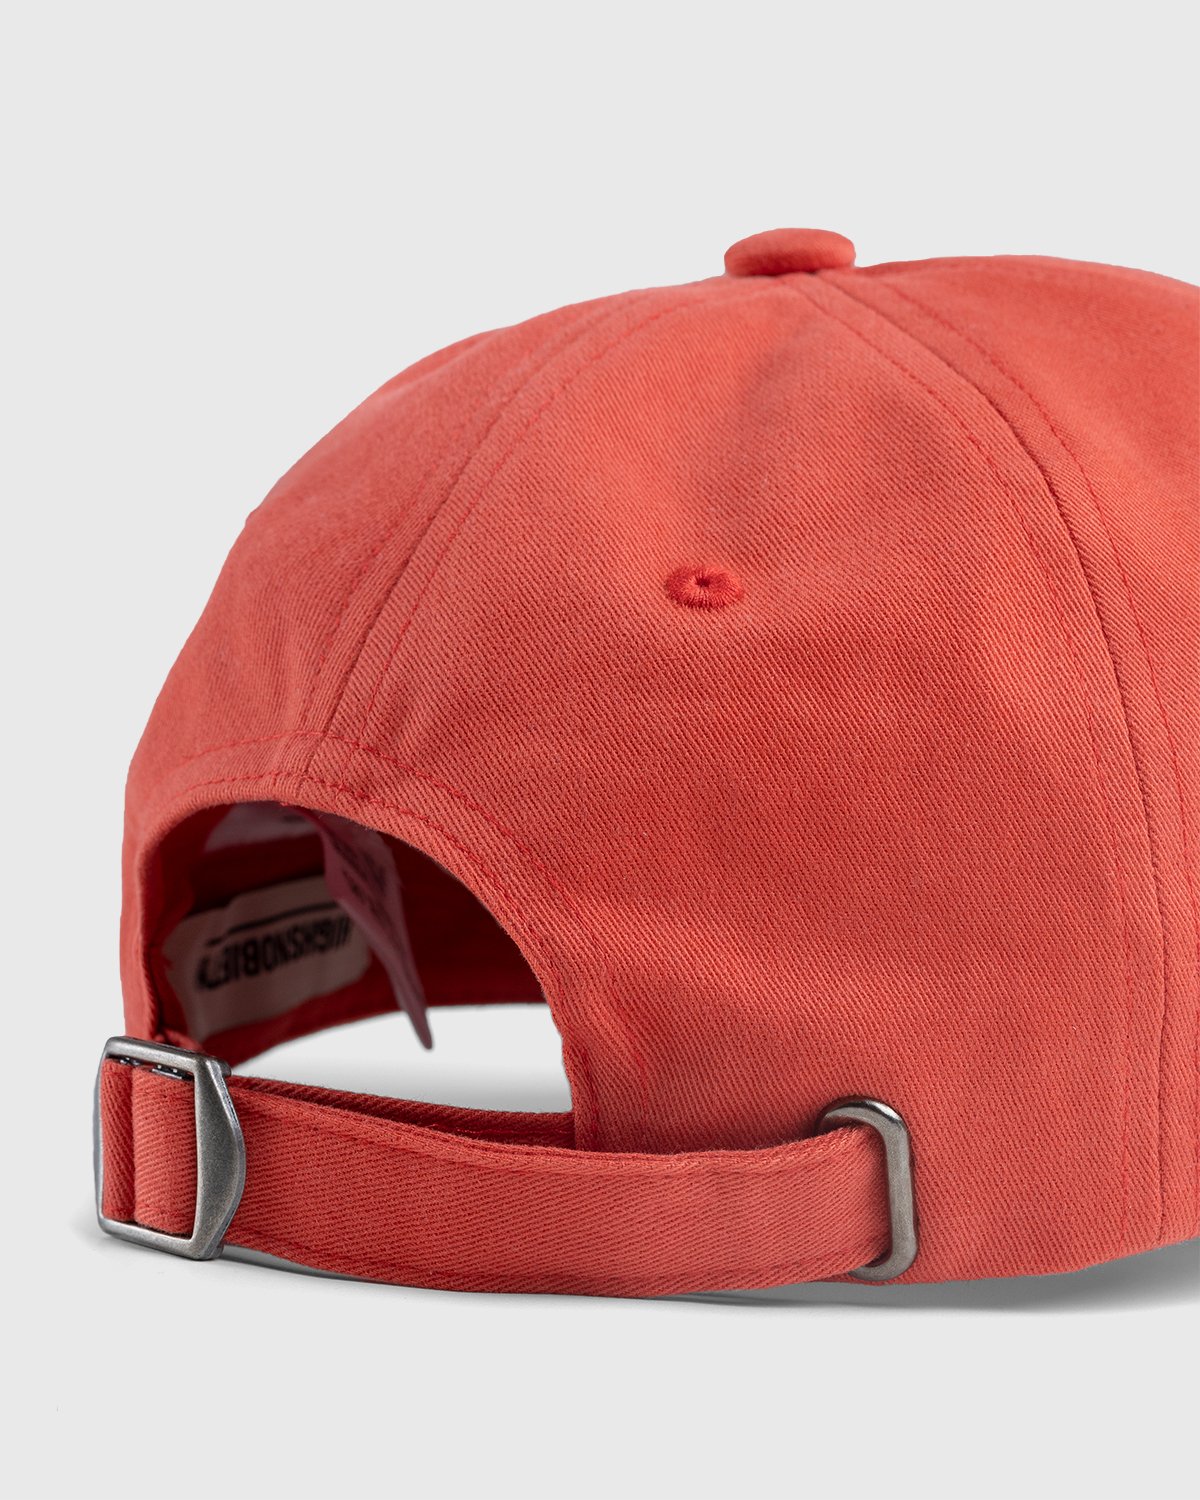 Highsnobiety - Baseball Cap Red - Accessories - Red - Image 5